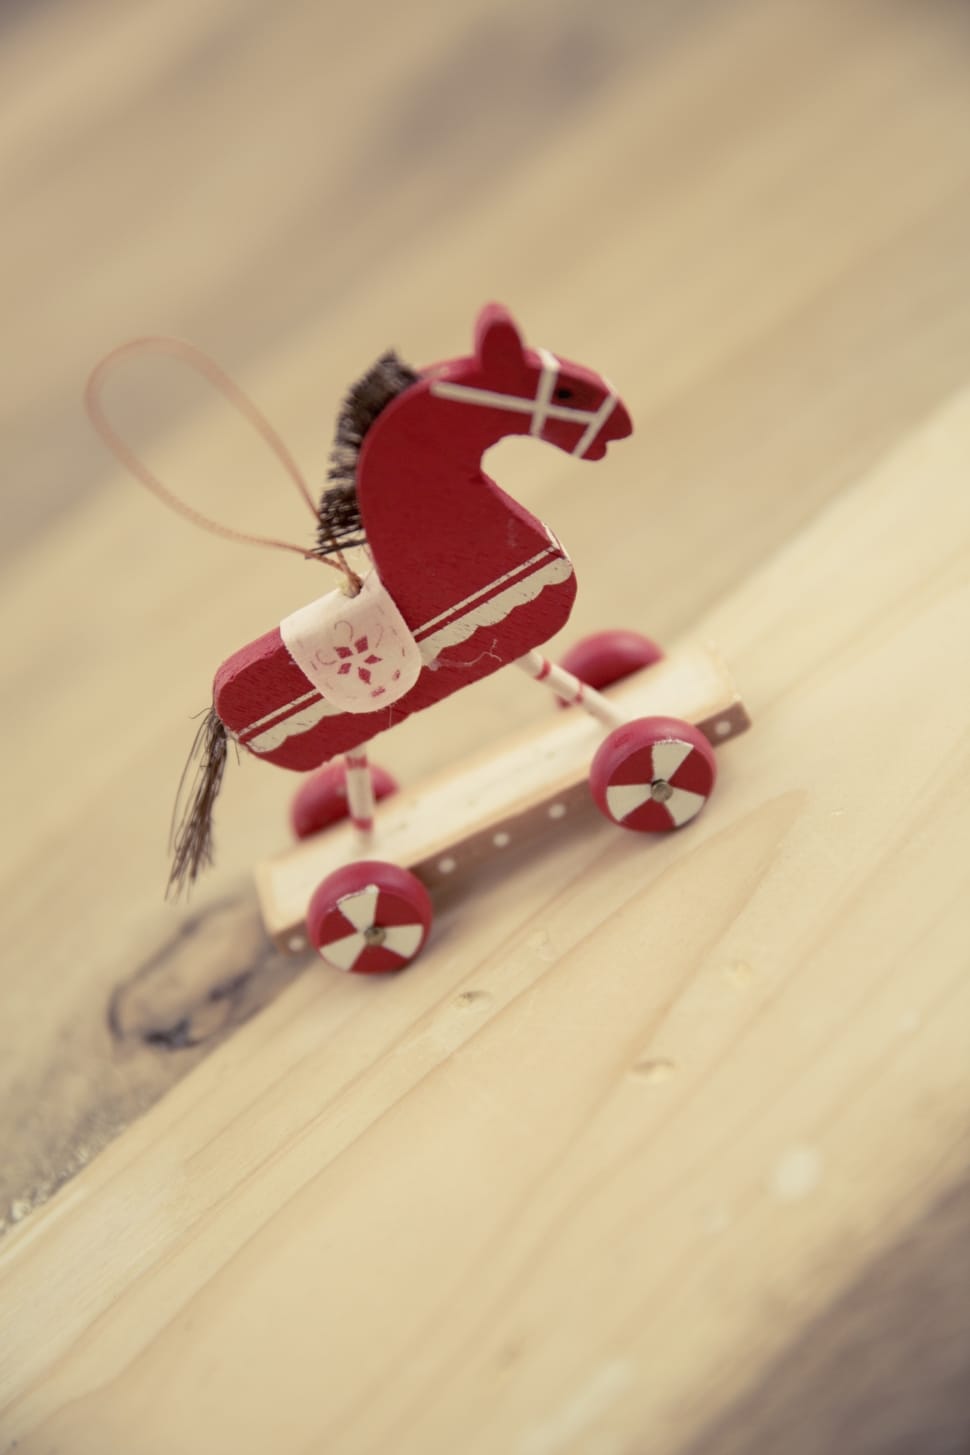 red and white wooden horse toy with wheels macro photography preview